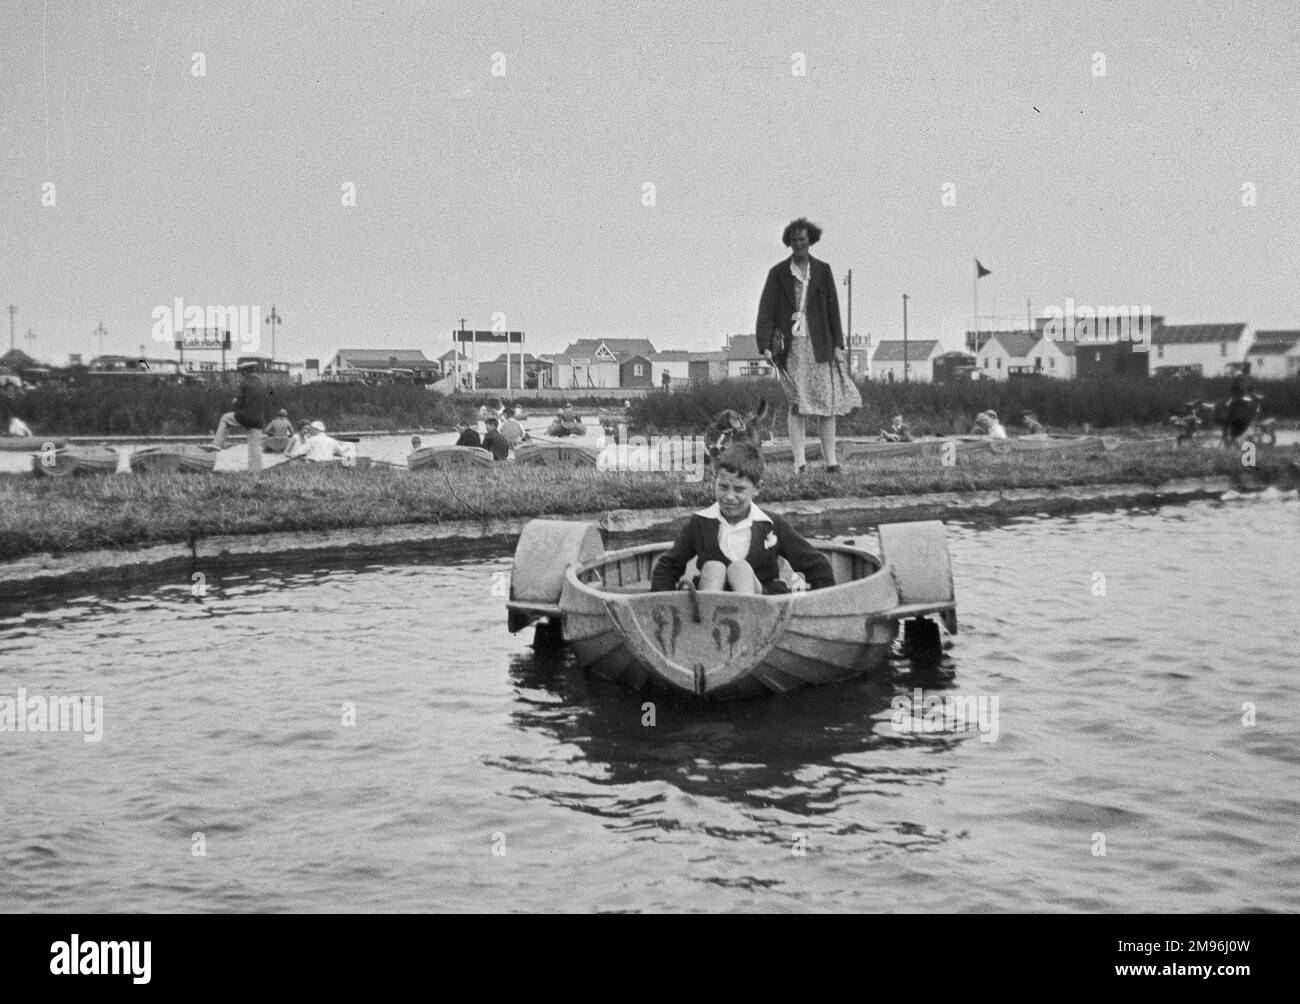 Pedalo Black and White Stock Photos & Images - Alamy